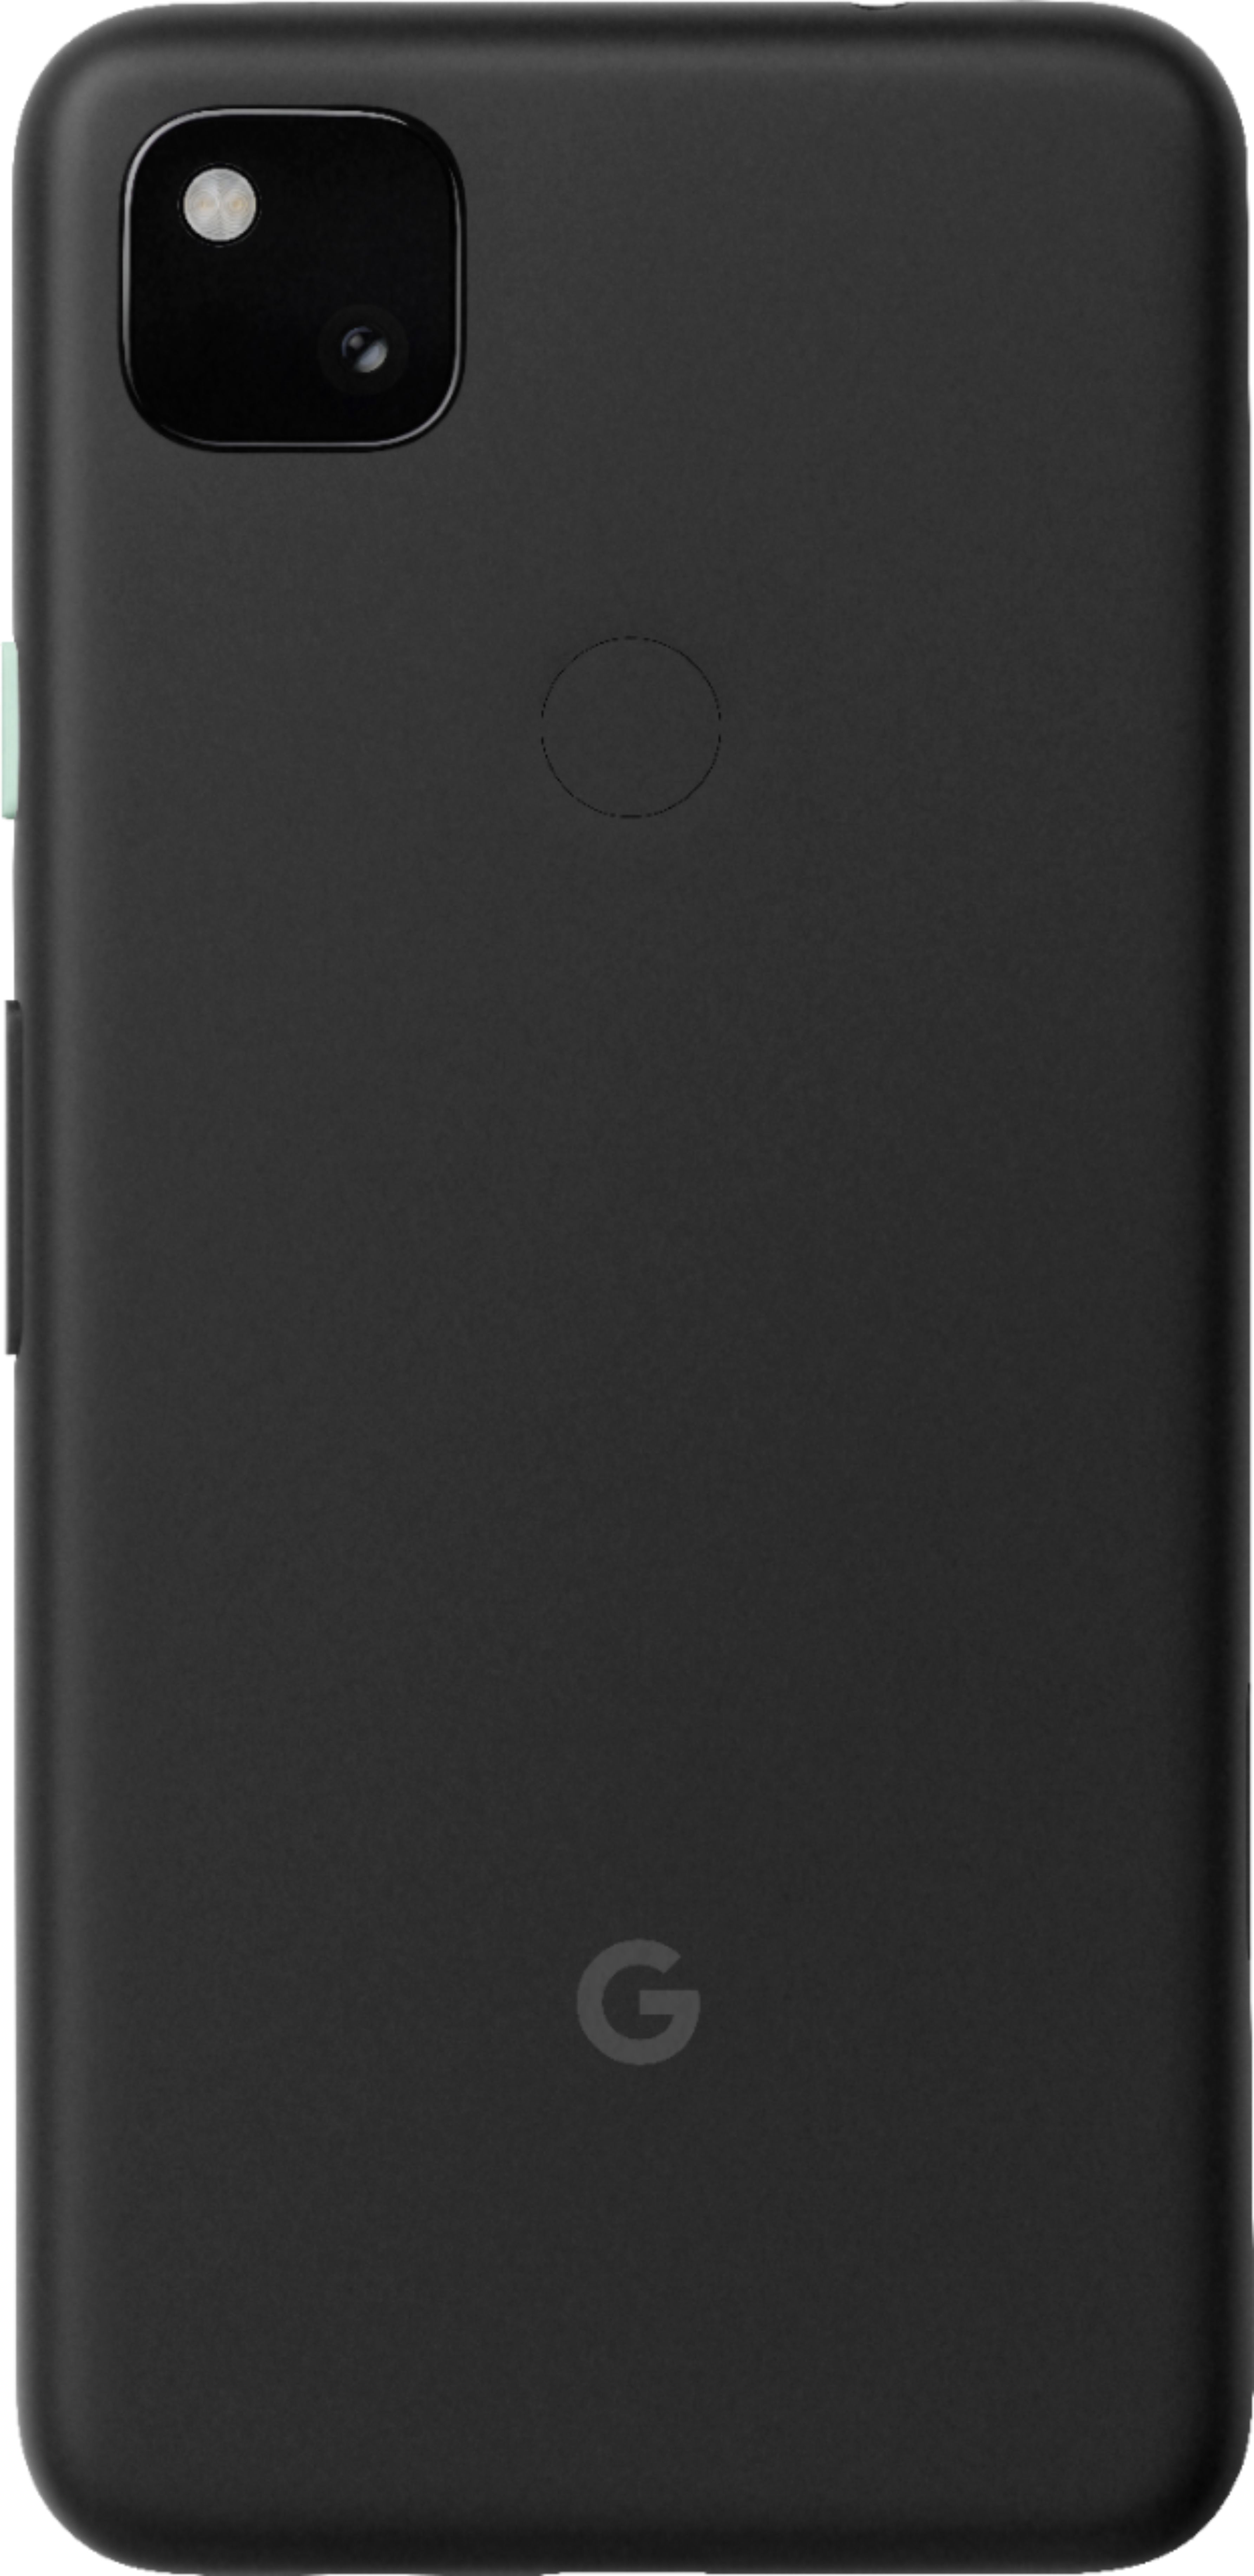 Back View: Google - Geek Squad Certified Refurbished Pixel 4 with 128GB Cell Phone (Unlocked) - Just Black